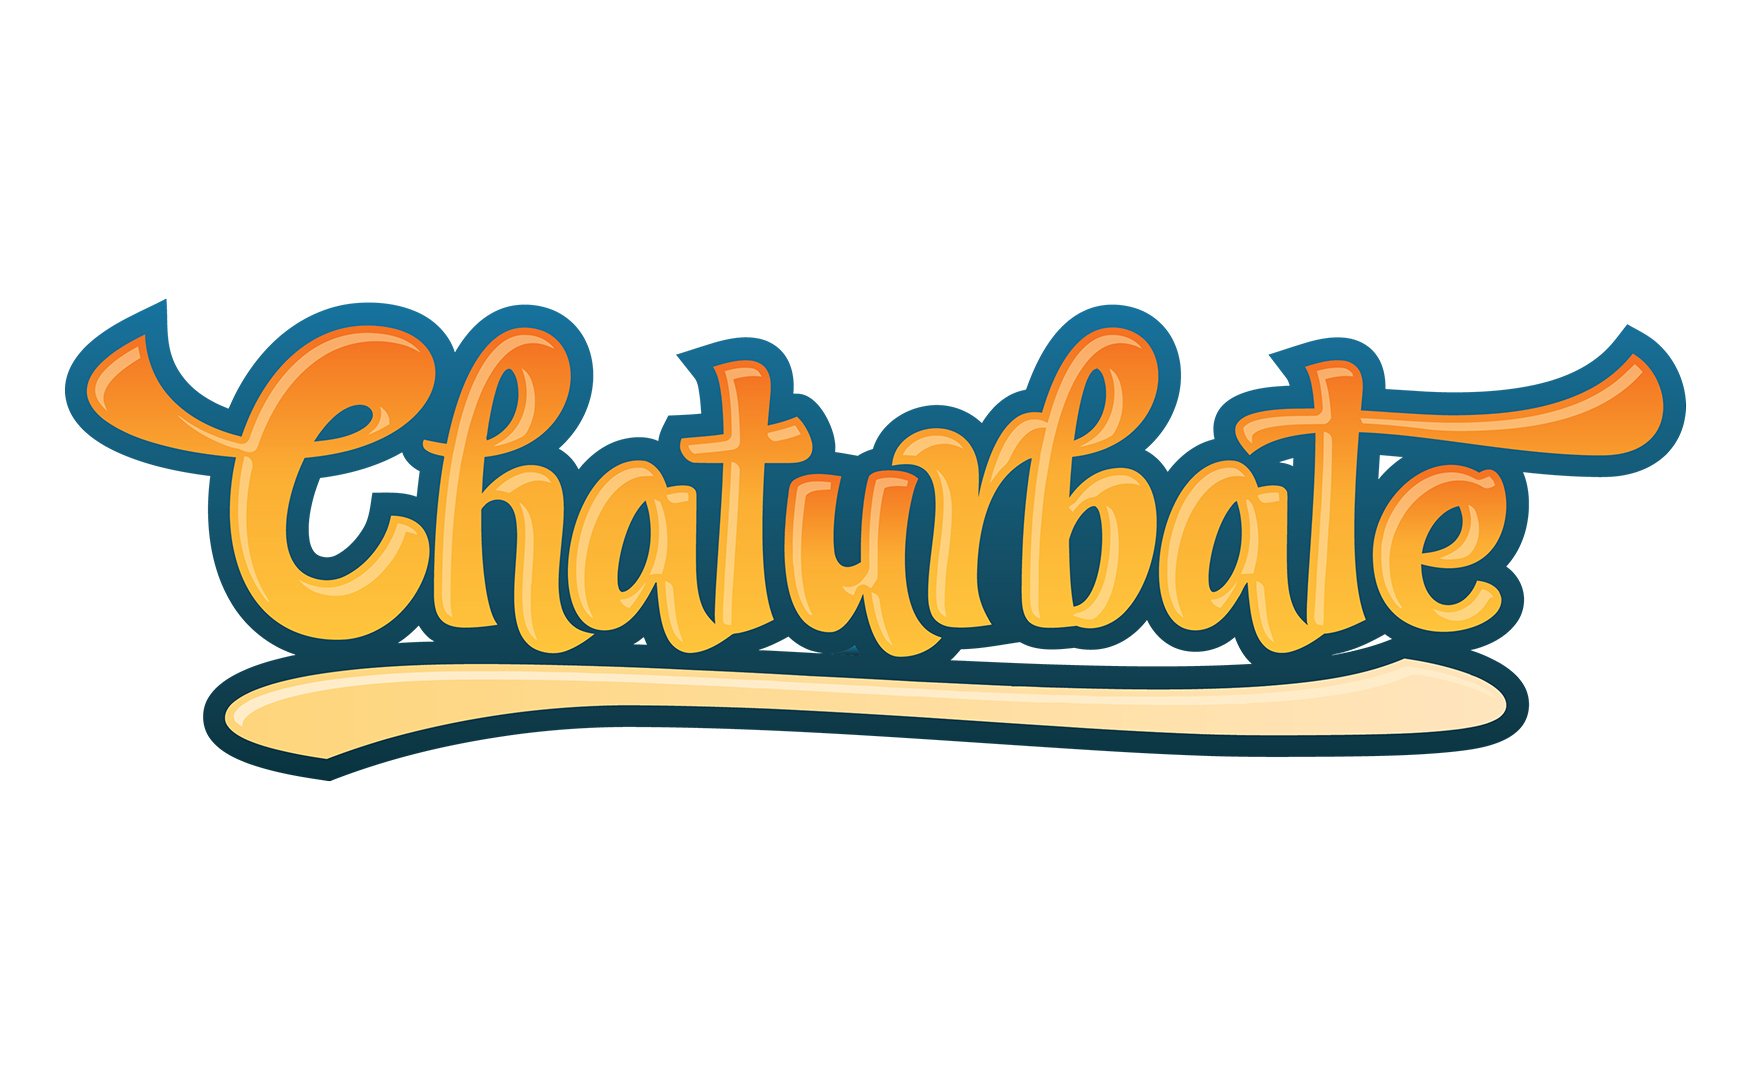 How Much Do Chaturbate Tokens Actually Cost?